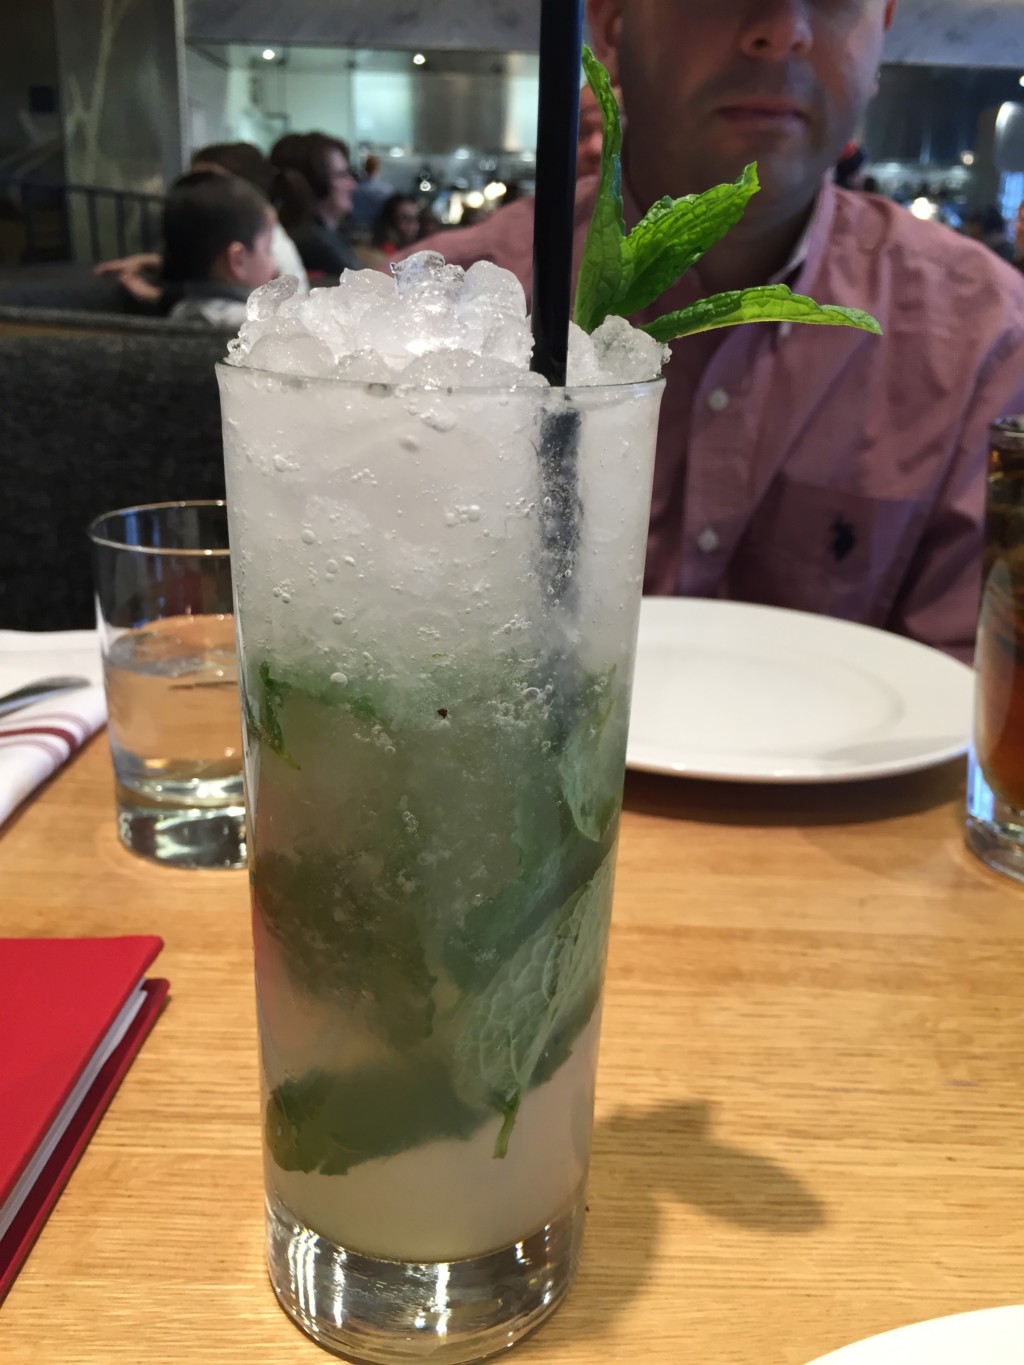 The mocktail mint cooler at Earl's in Somerville (January 2016)